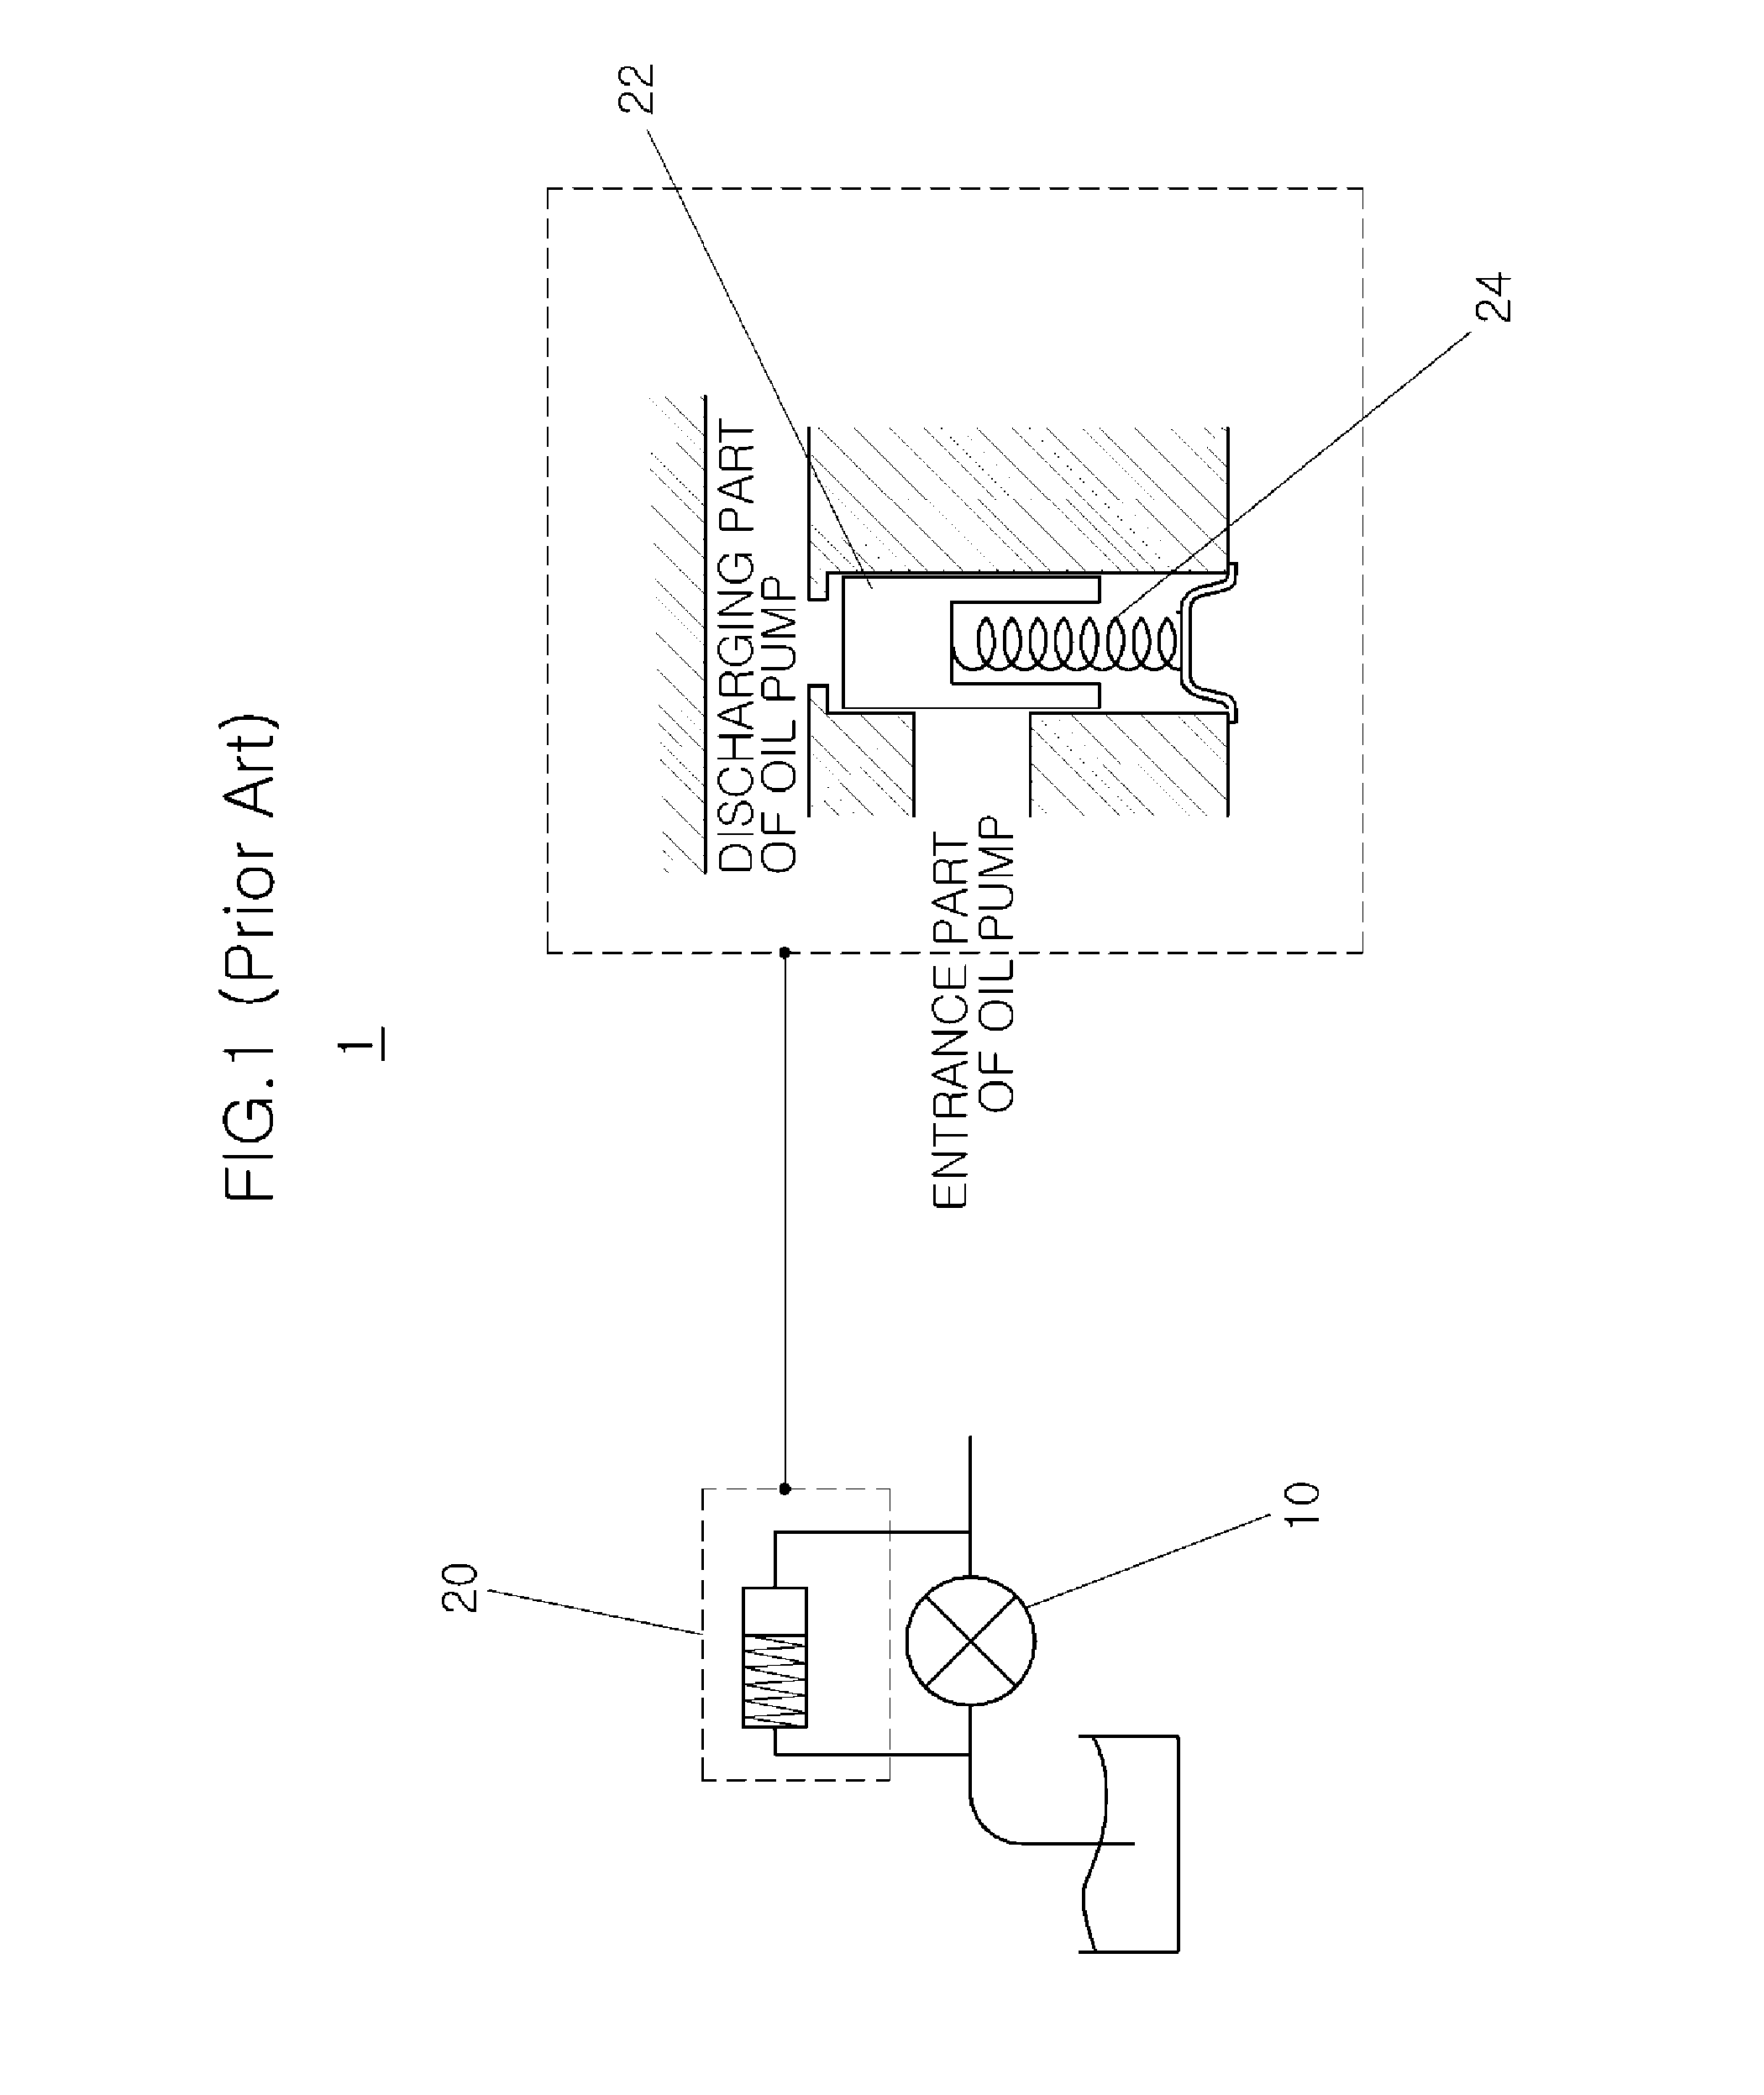 Oil pump control system for vehicle